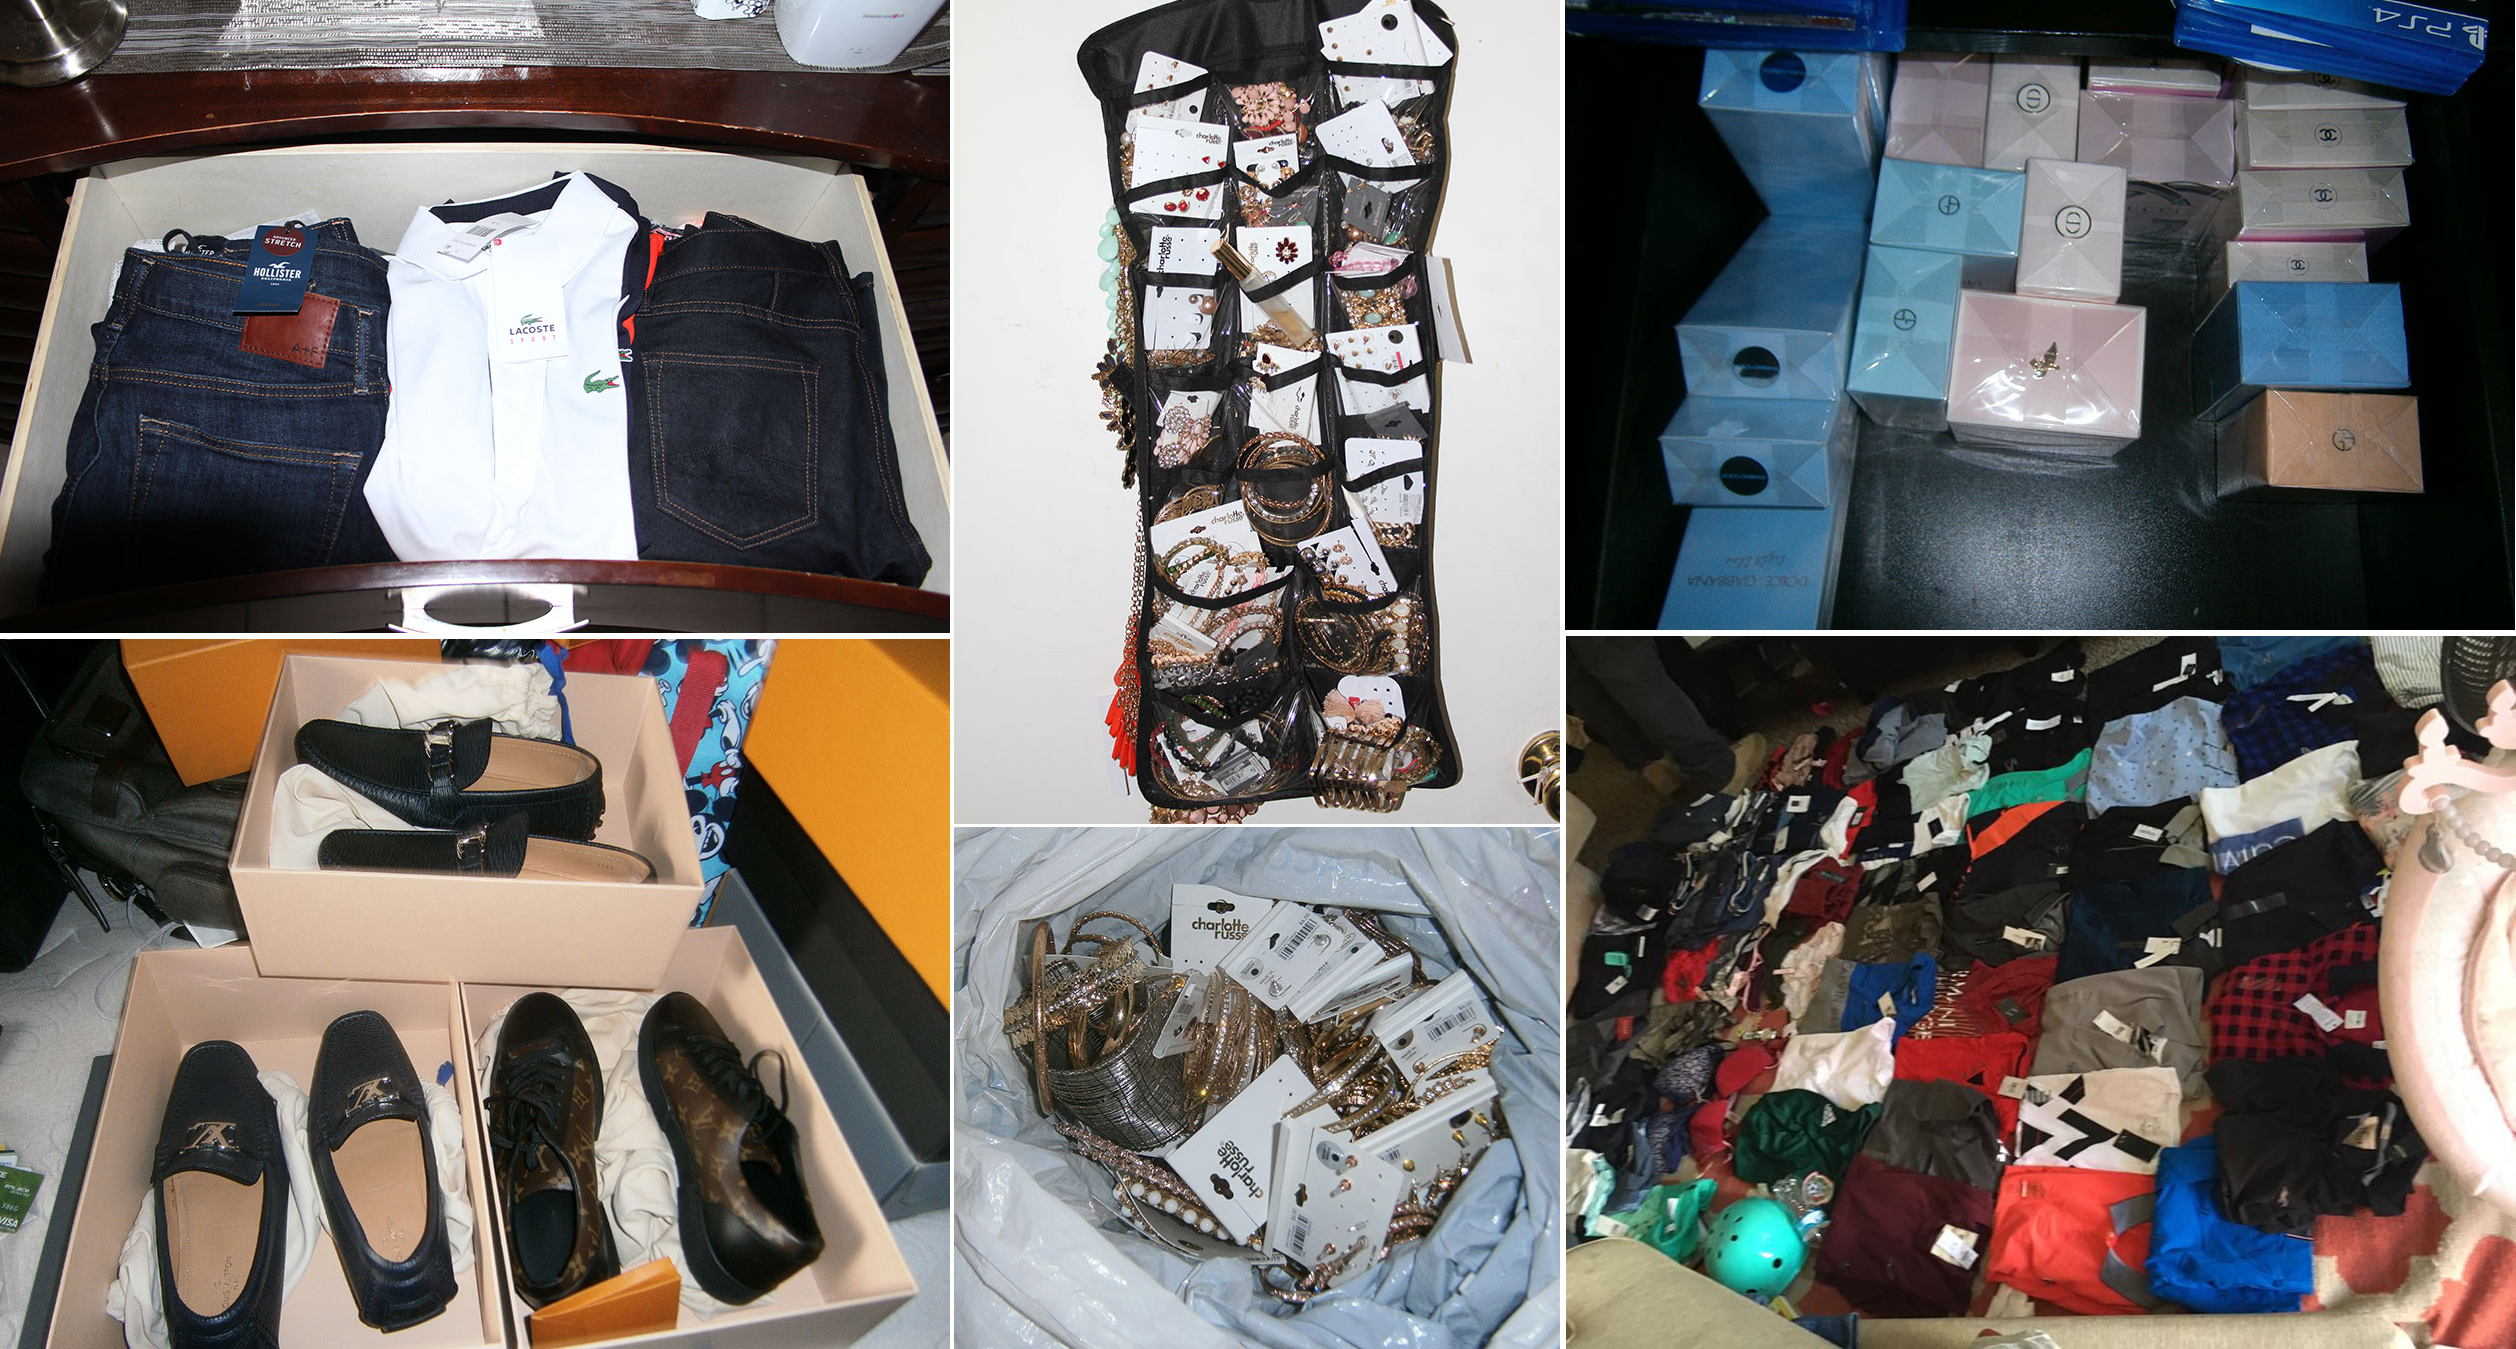 Feds Break Up $20M Shoplifting Ring That Stole Clothing From Coast To Coast